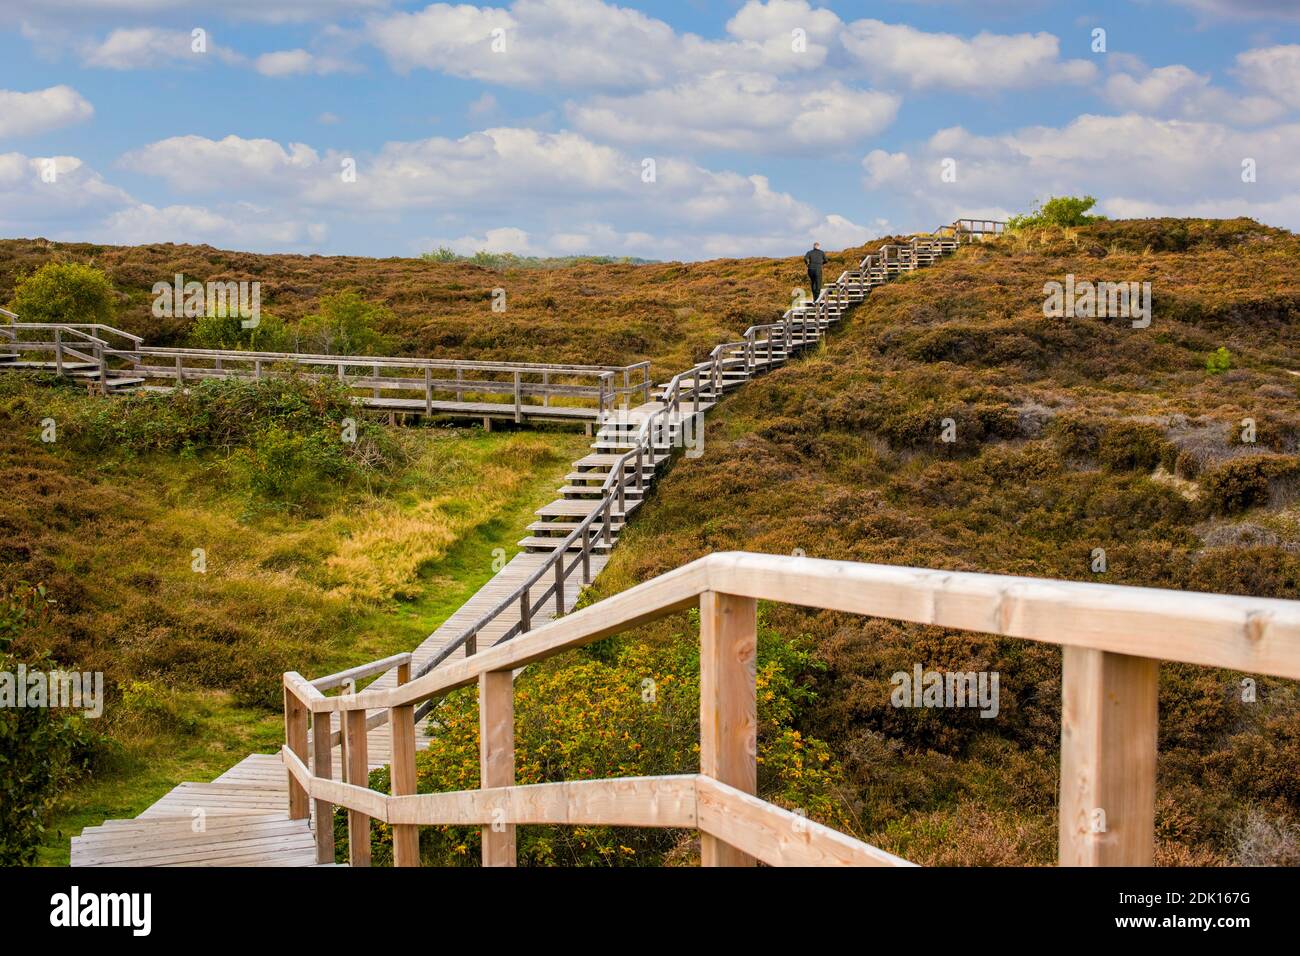 Jogger runs on the wooden stairs in the Braderuper Heide, Sylt, Schleswig-Holstein, Germany Stock Photo